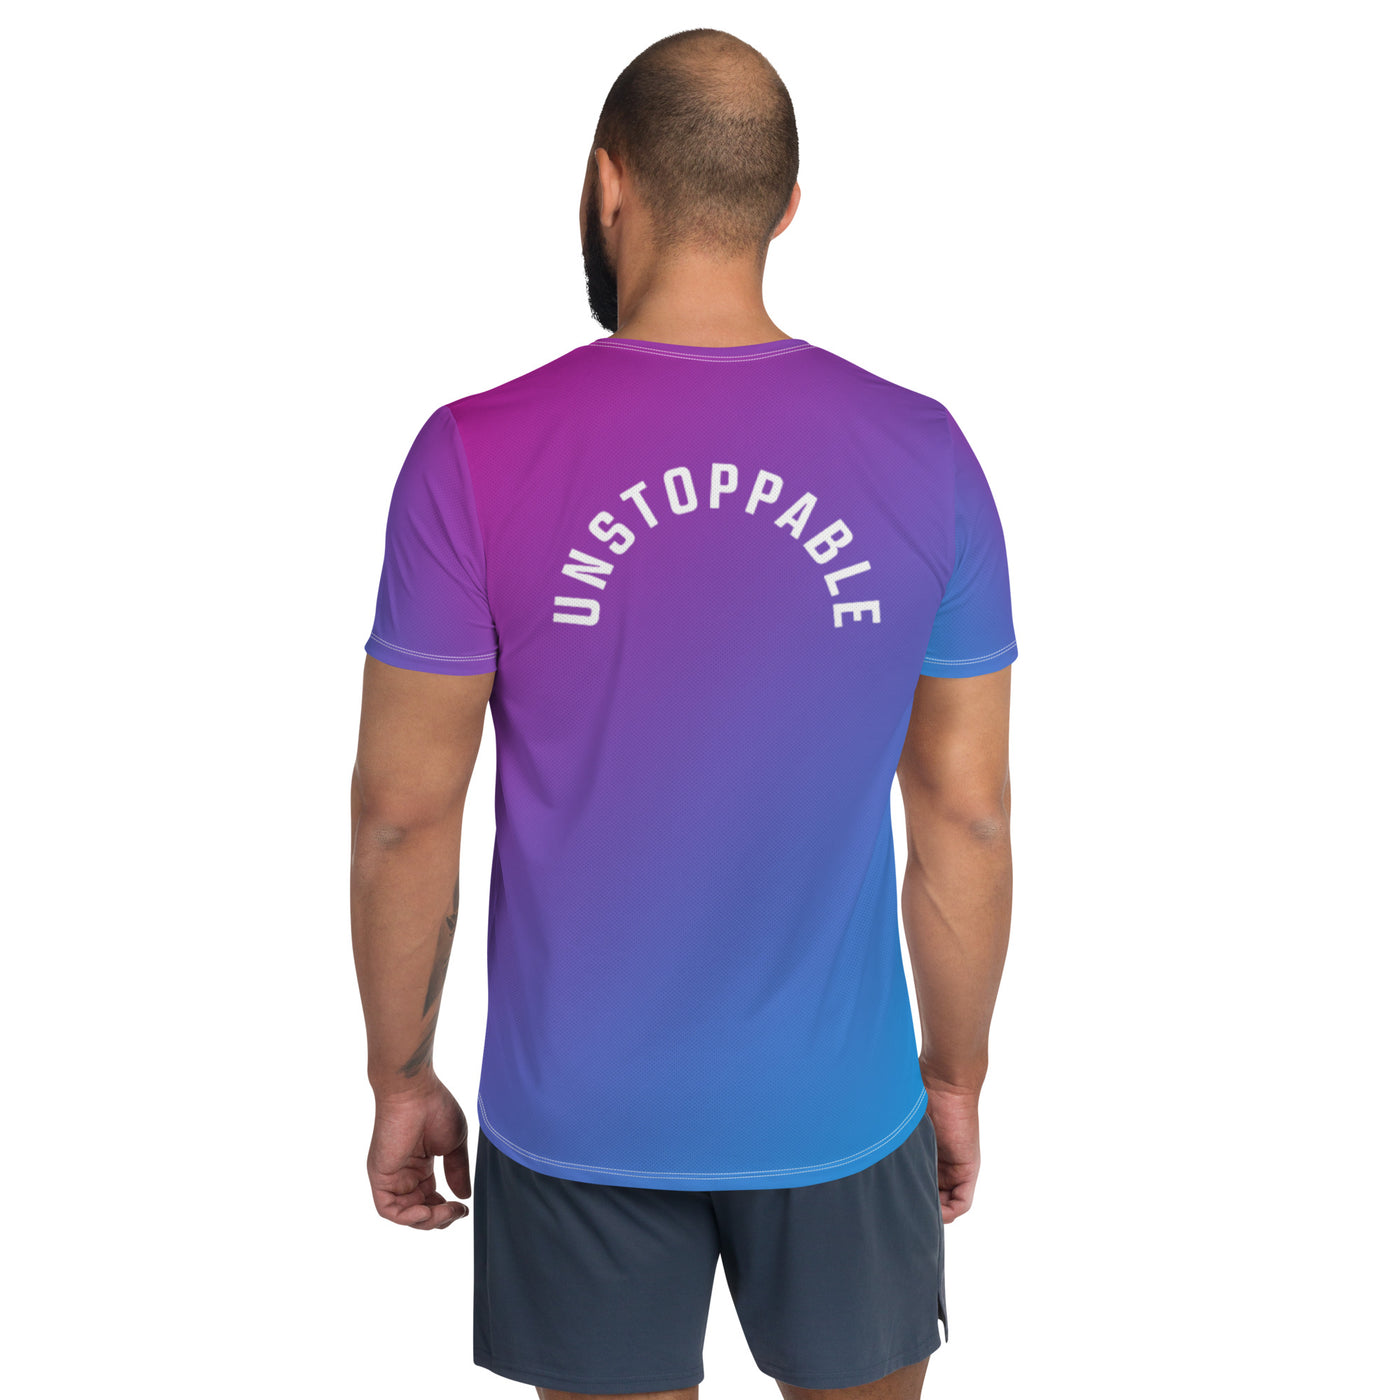 UNSTOPPABLE Male Athletic T-shirt